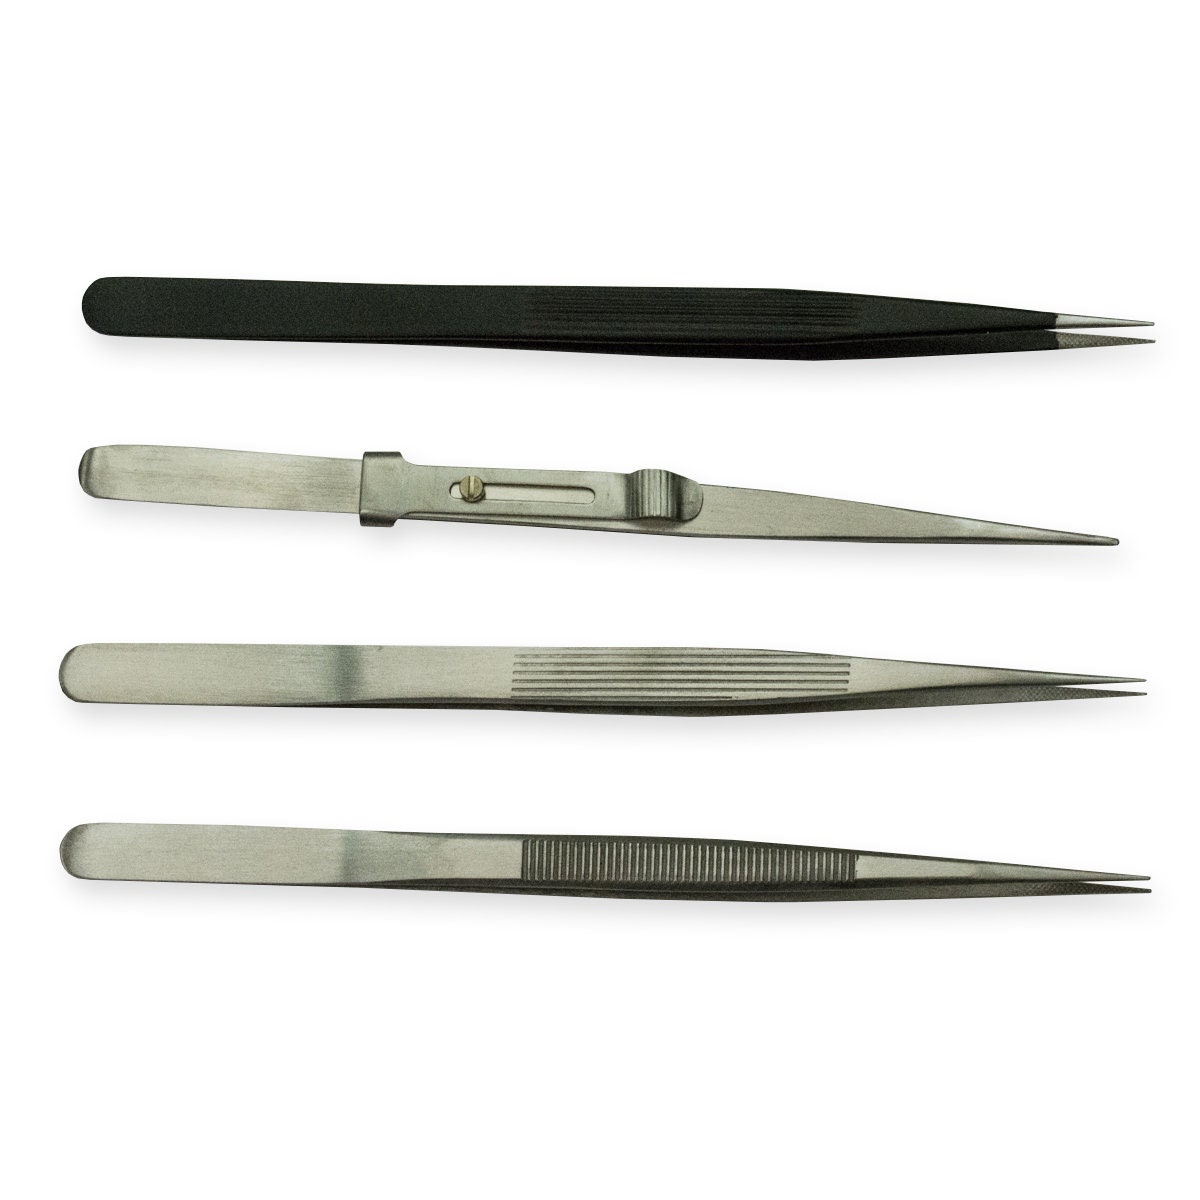 Large Tweezers With Rubber Tips PVC Coated Jewellery Making Hobby